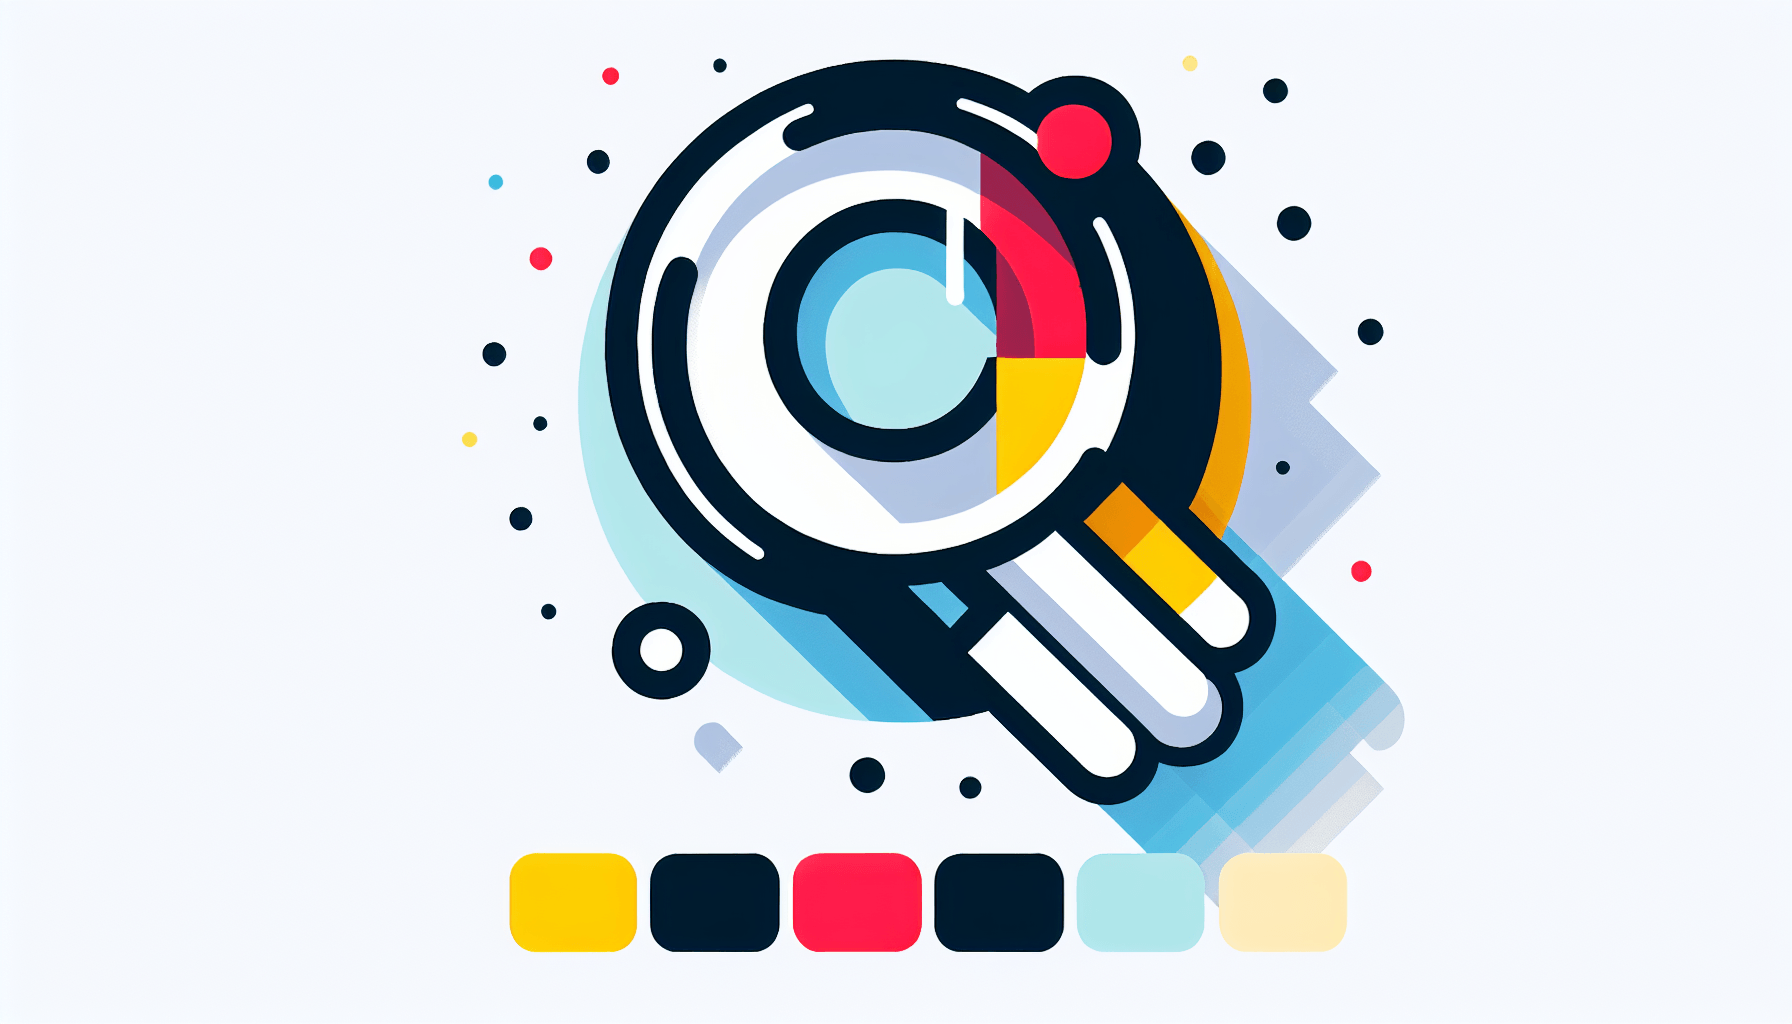 Magnifying glass in flat illustration style and white background, red #f47574, green #88c7a8, yellow #fcc44b, and blue #645bc8 colors.